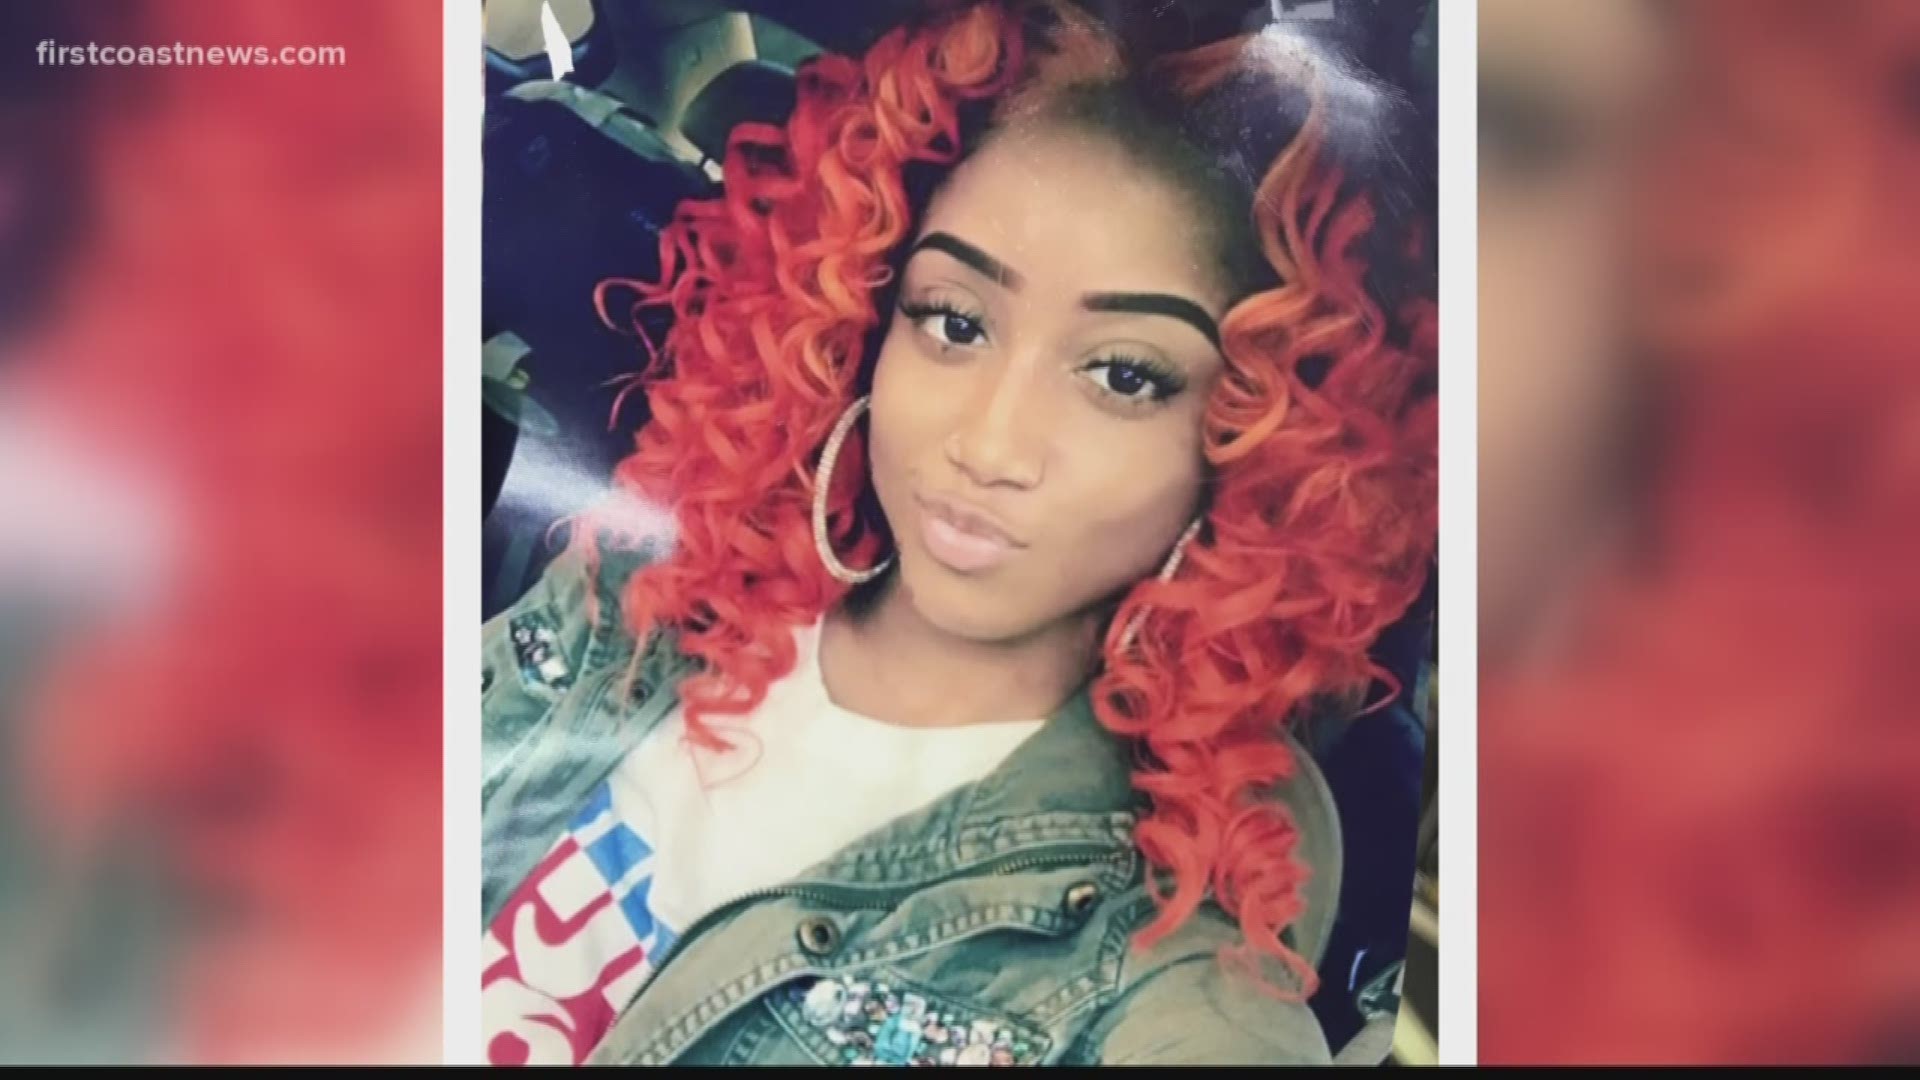 On Friday, friends identified the woman as Felisia "Fefe" Williams. The friends didn't want to be named, but said Keeshaun Glover was Williams' ex-boyfriend.